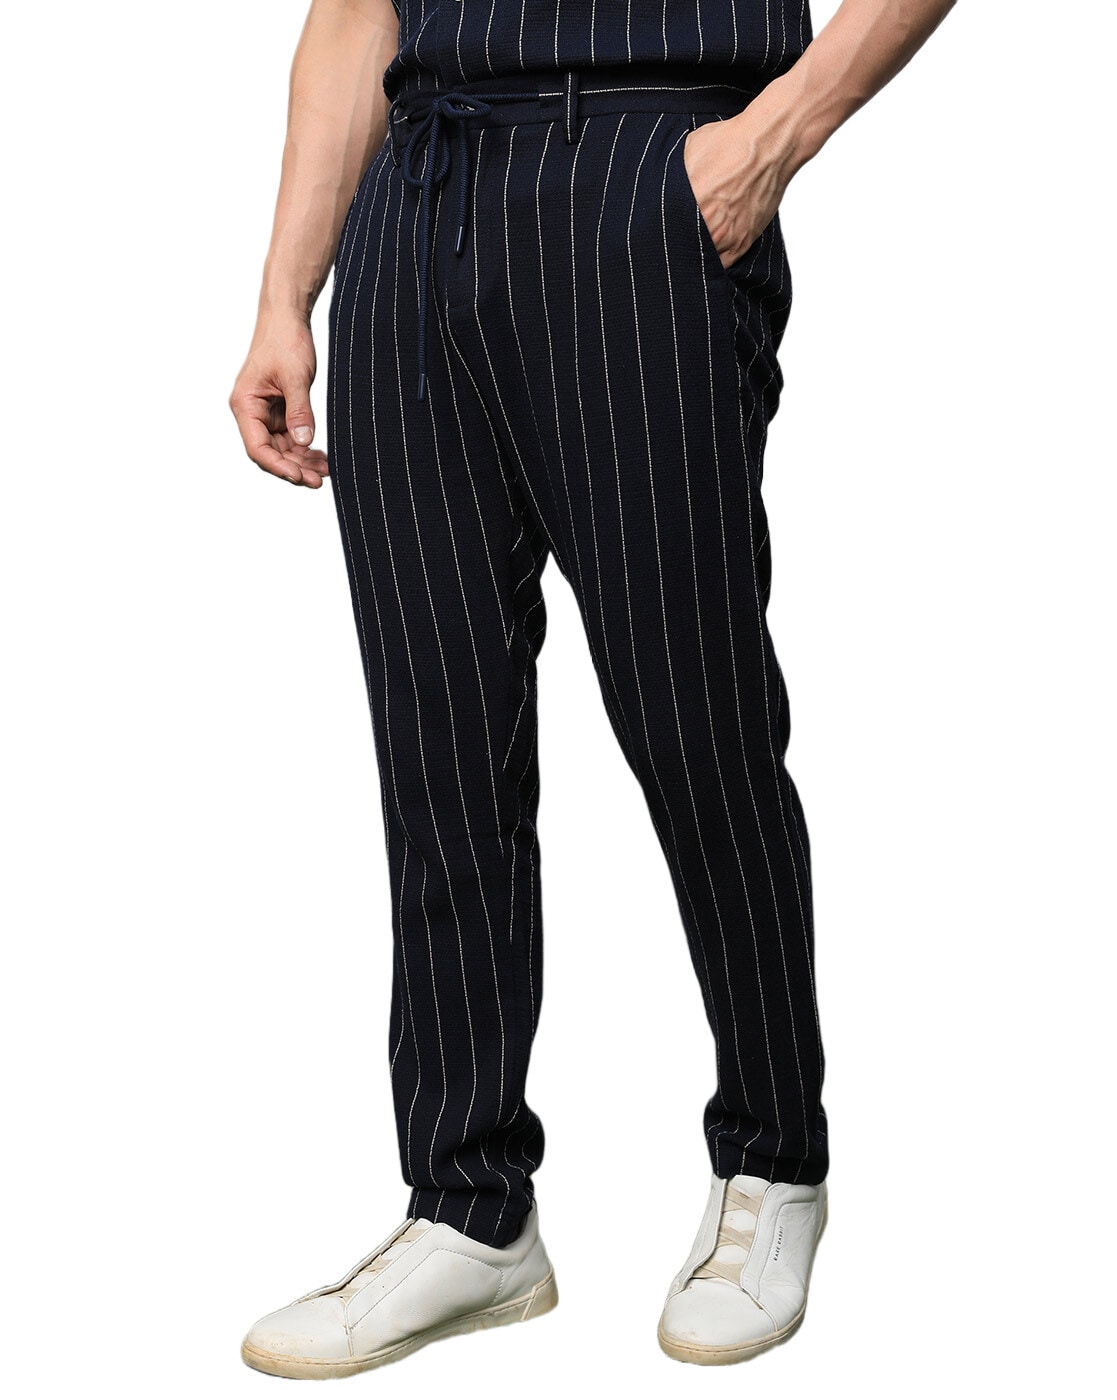 Black Vertical Striped Dress Pants Outfits For Men (50 ideas & outfits) |  Lookastic